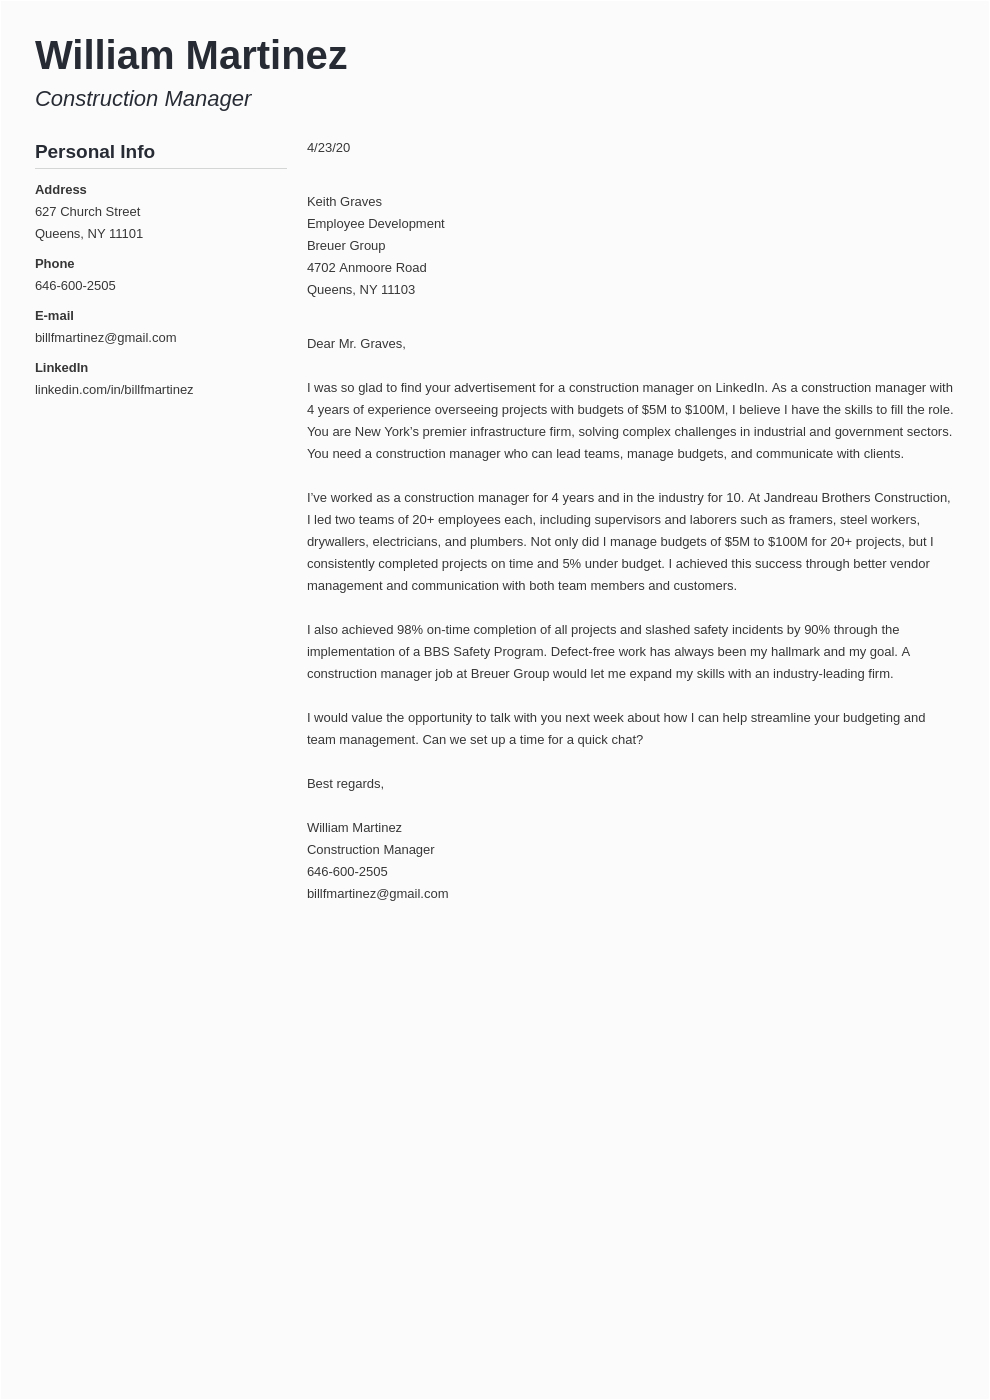 Construction Resume Cover Letter Free Samples Construction Cover Letter Examples & Writing Guide